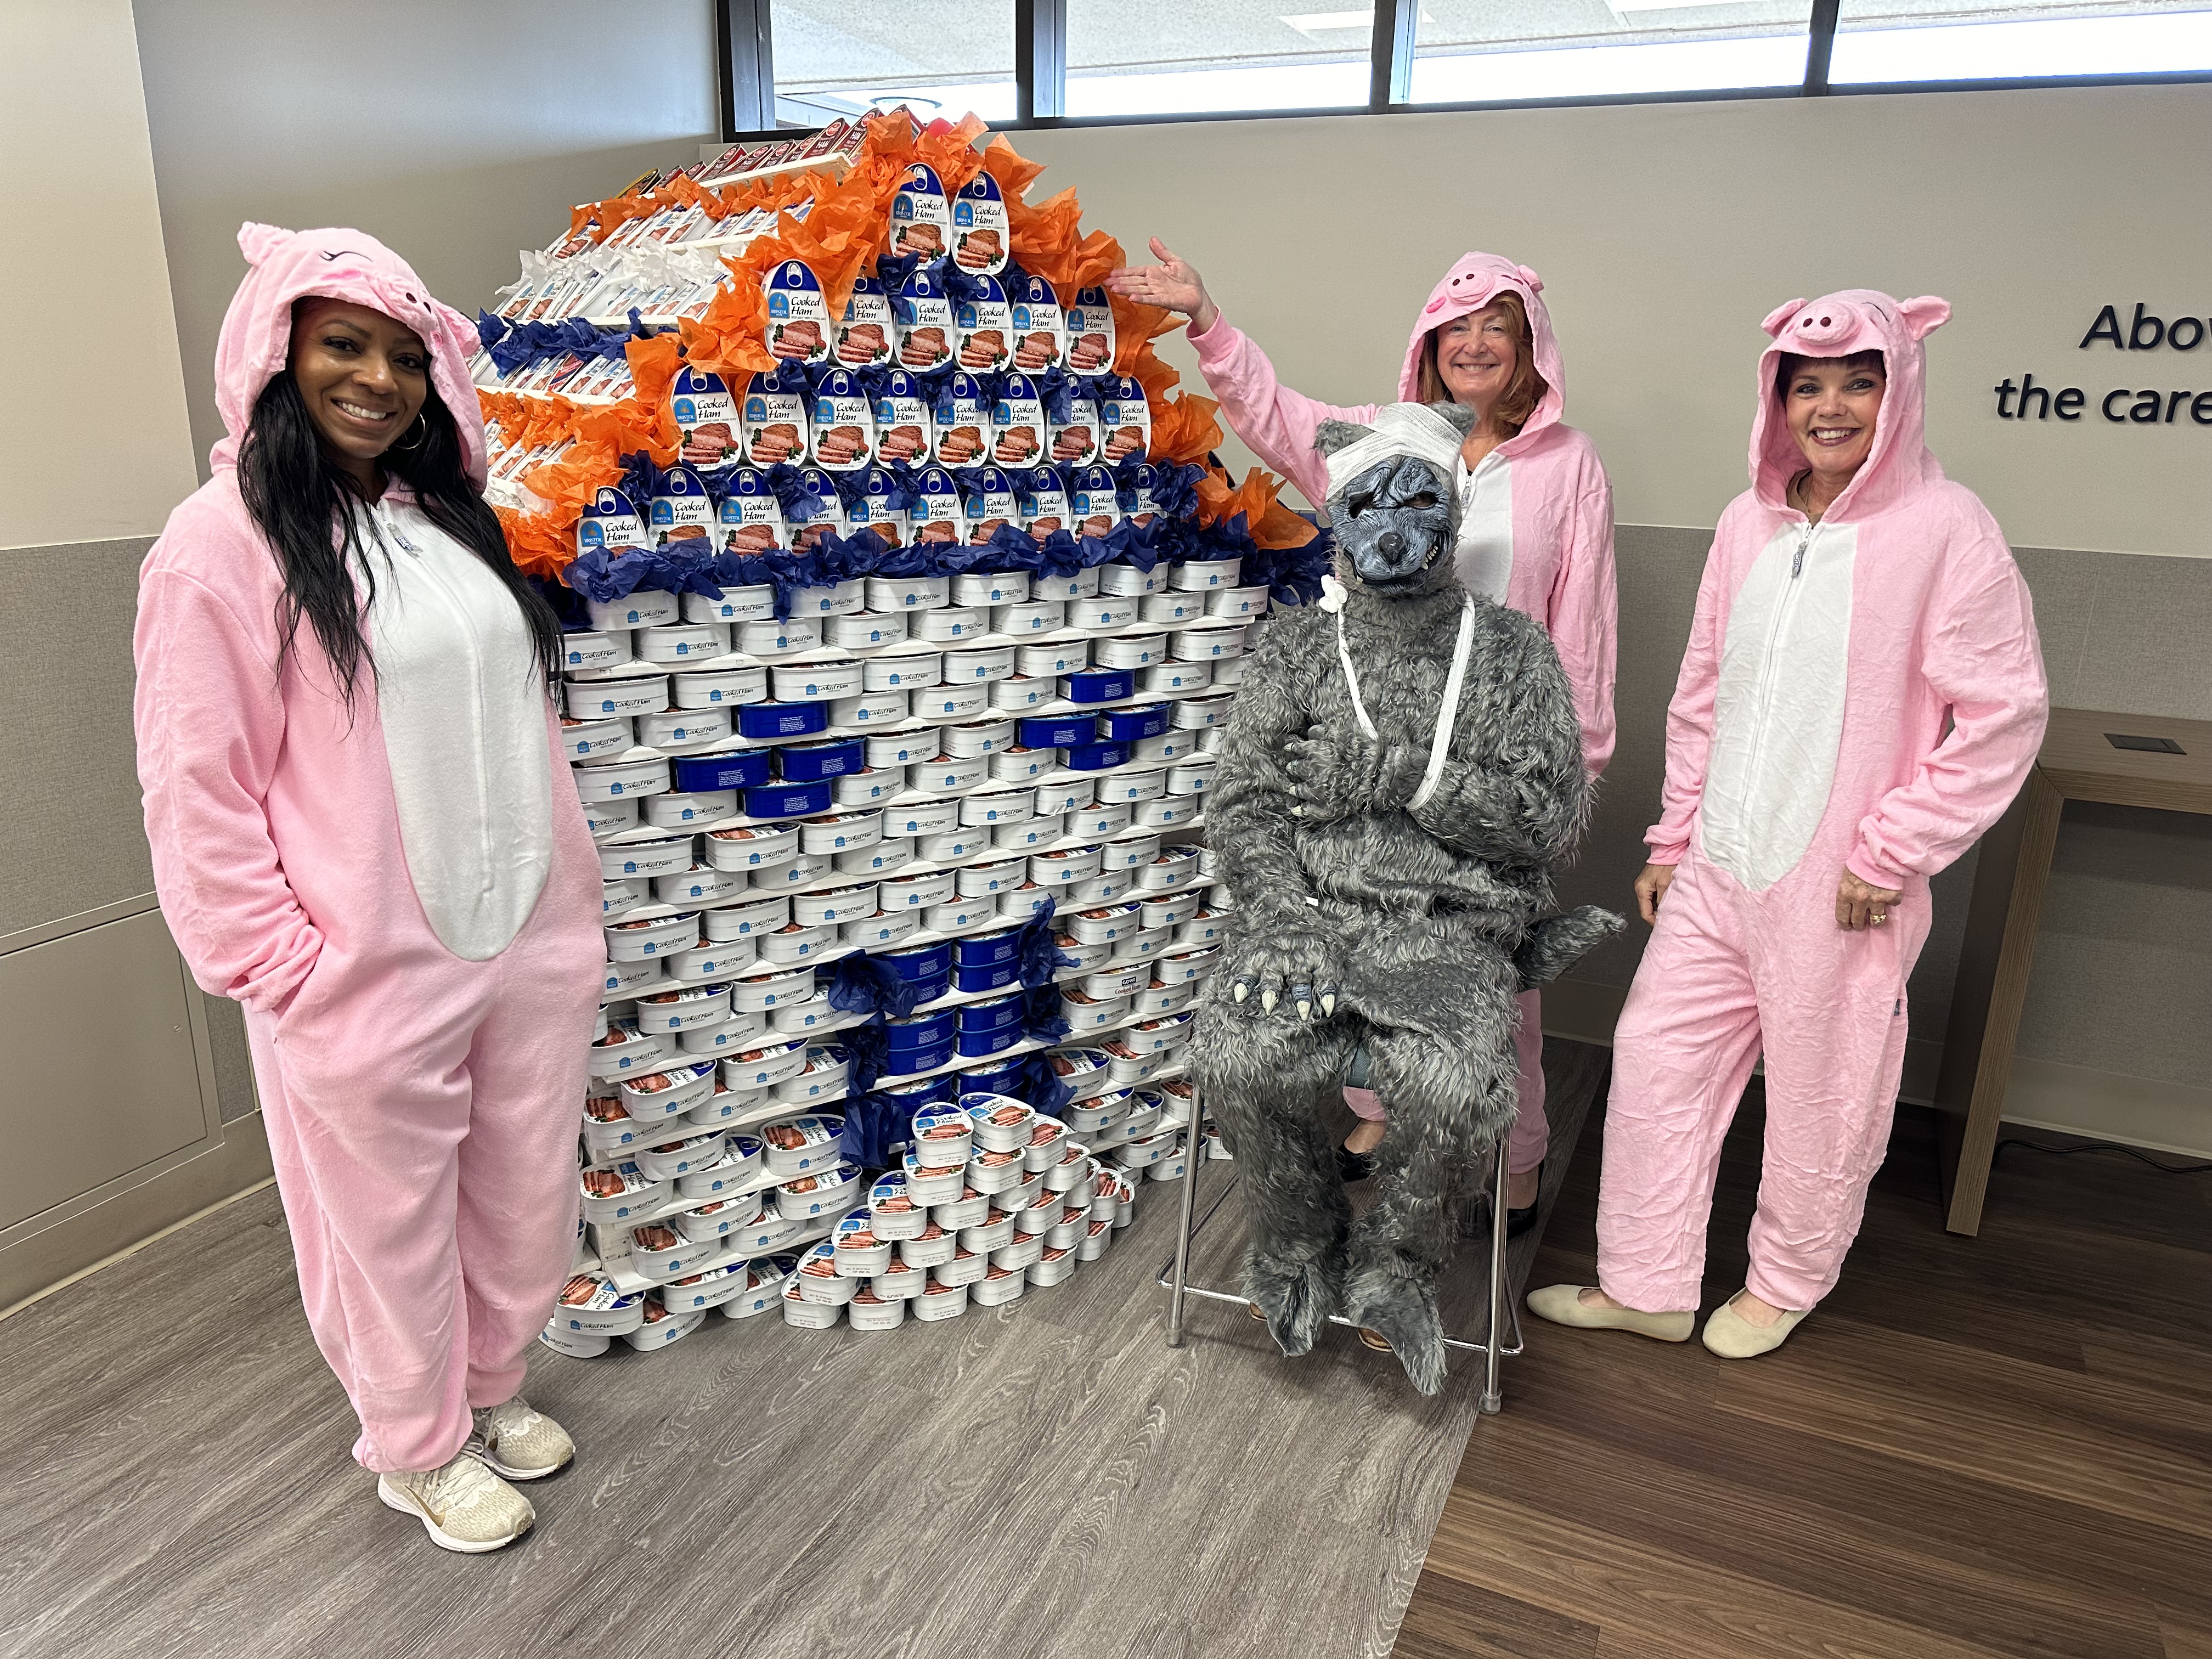 Hospital staff dressed as the Big Bad Wolf and Three Little Pigs pose in front of their house shaped sculpture made of canned food.